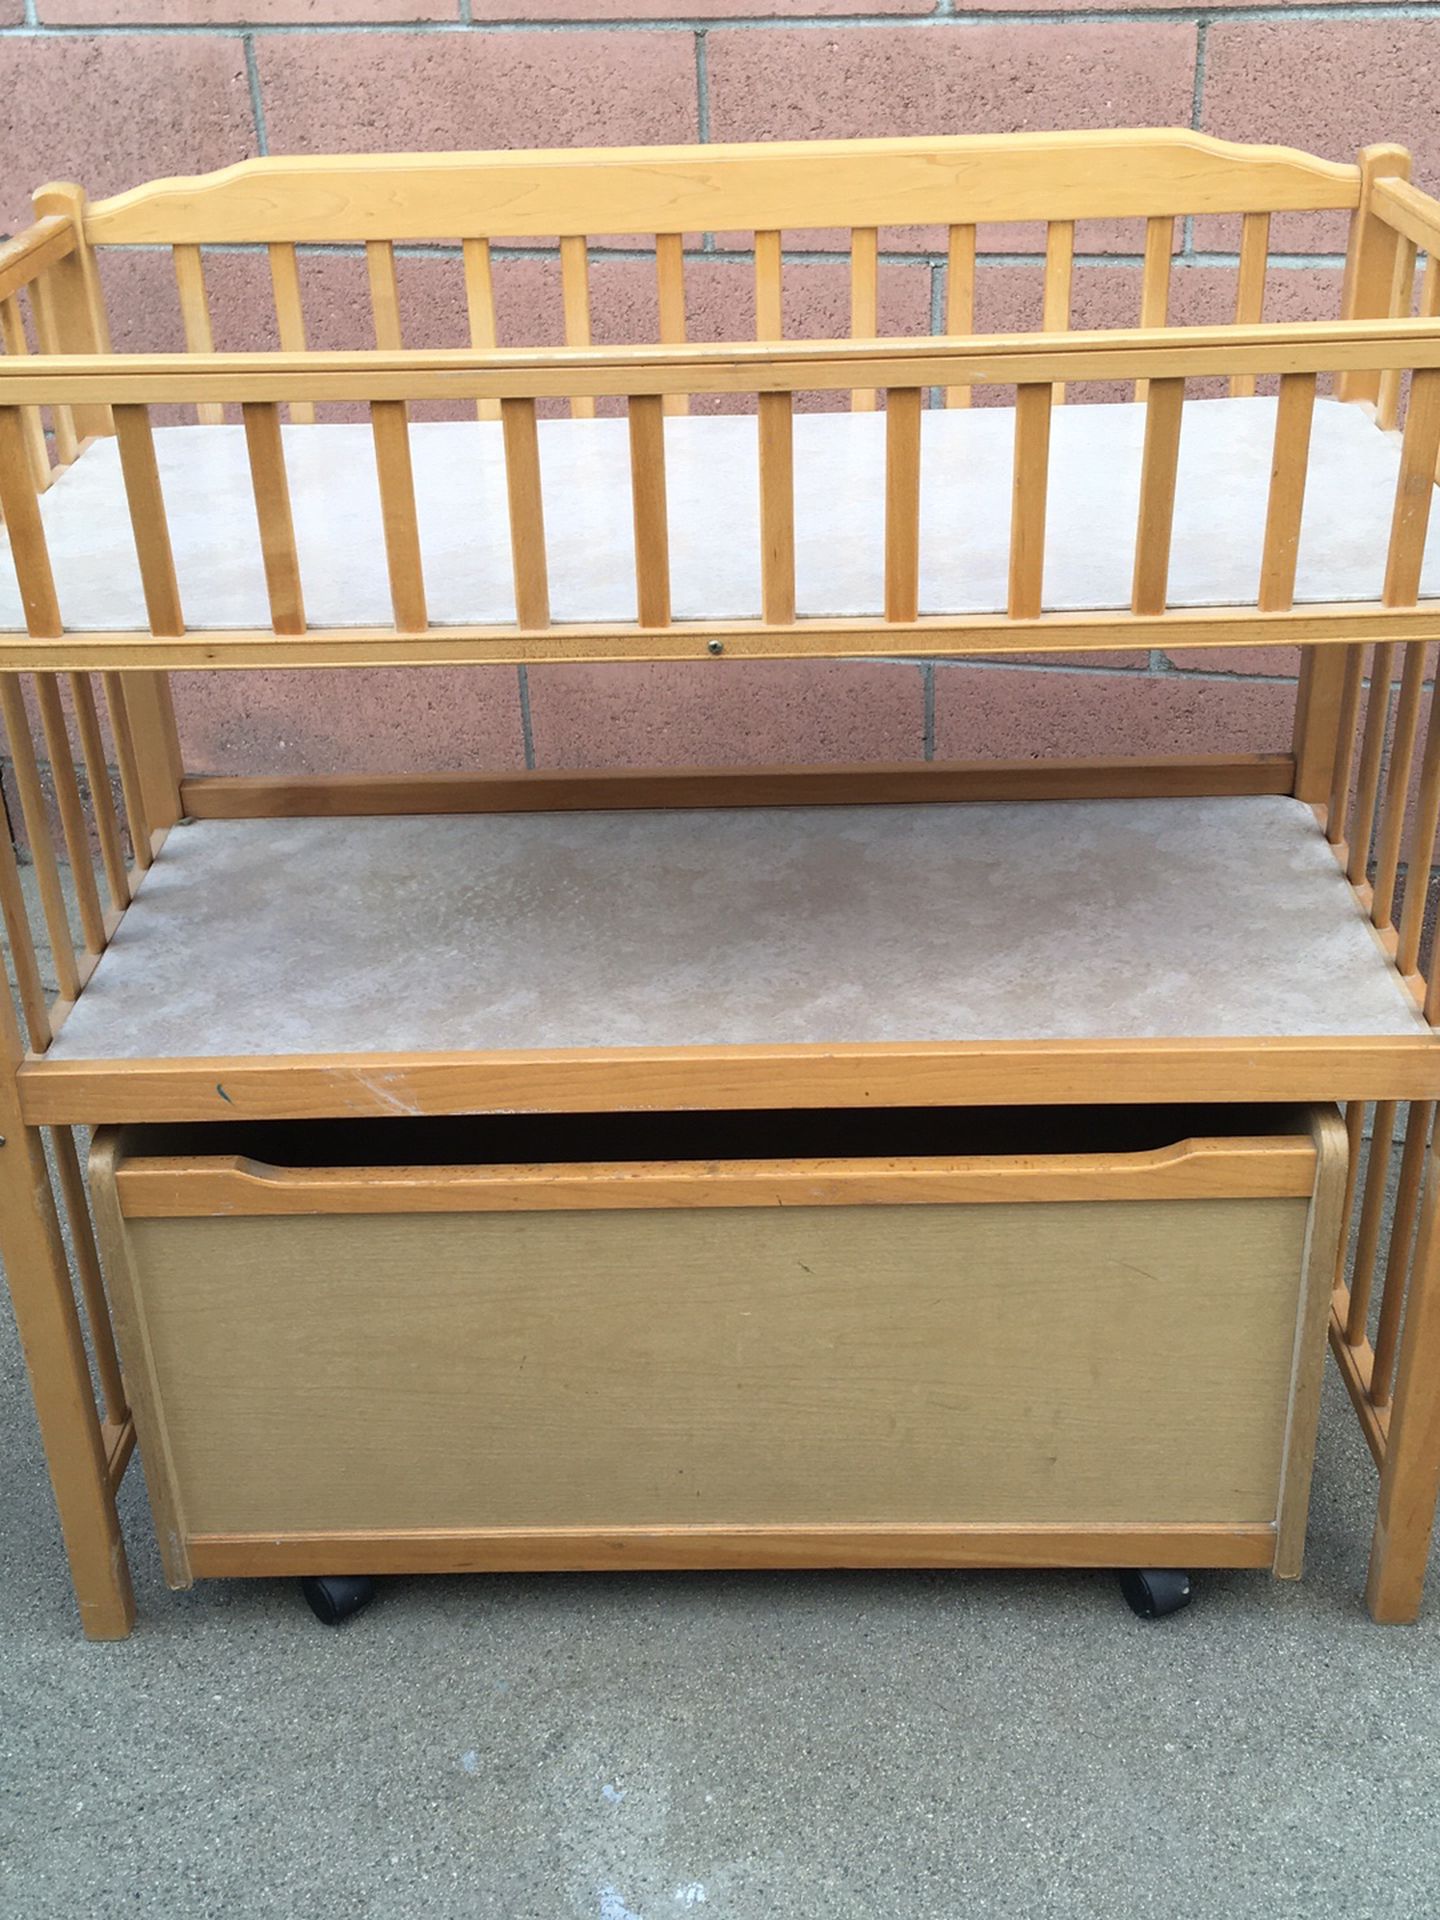 Baby Changing Table With Storage Box w/wheels